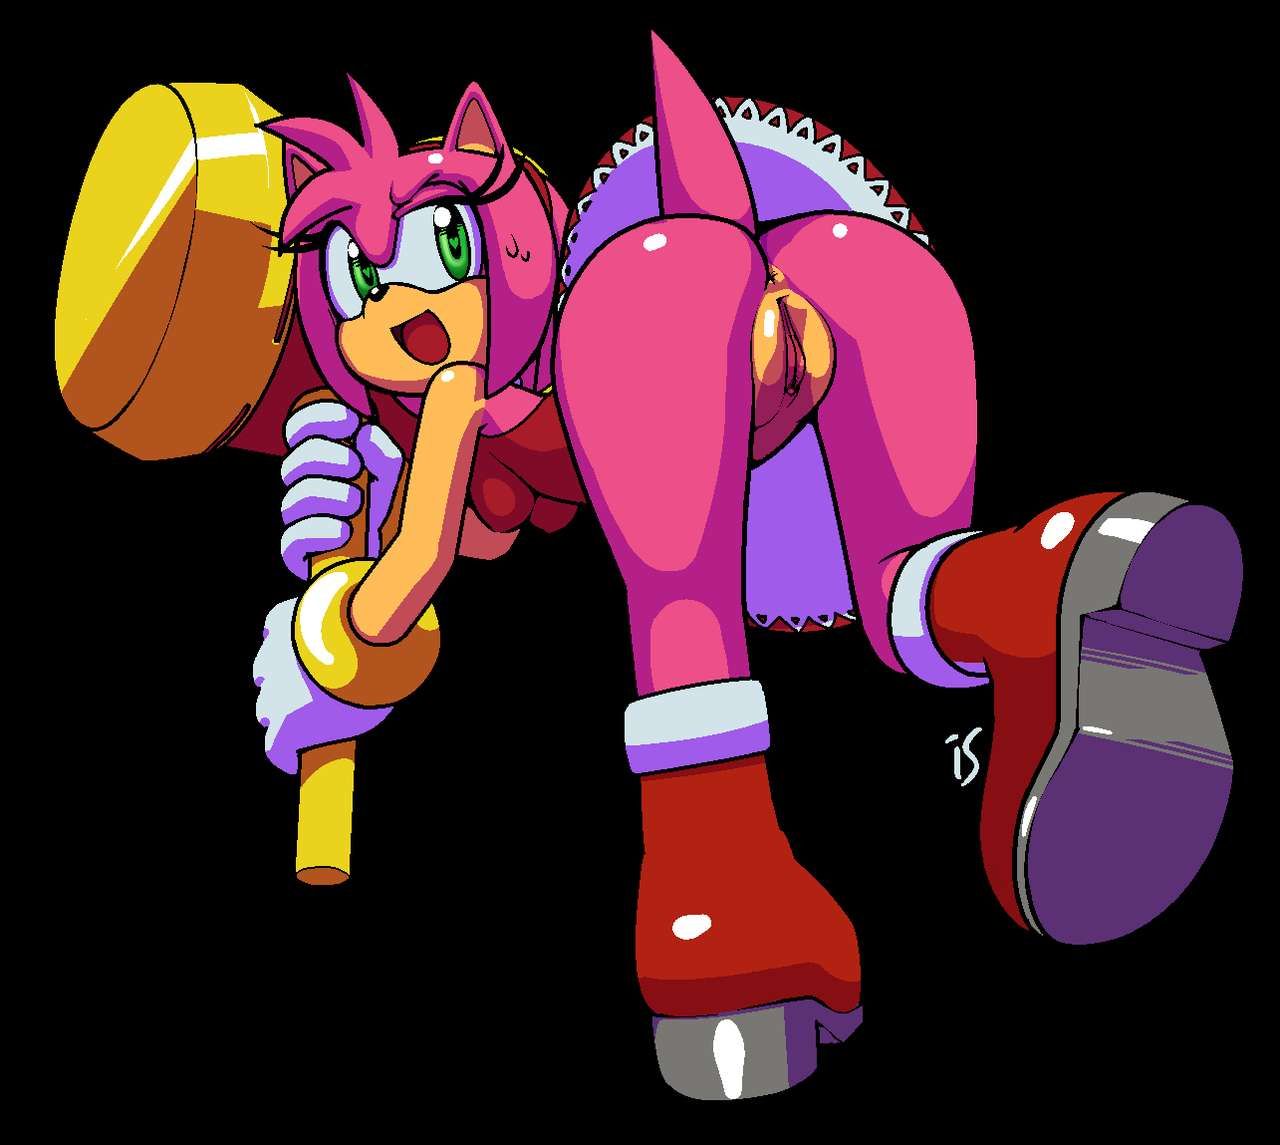 Amy Rose Collection - Hotred/isadultart 22